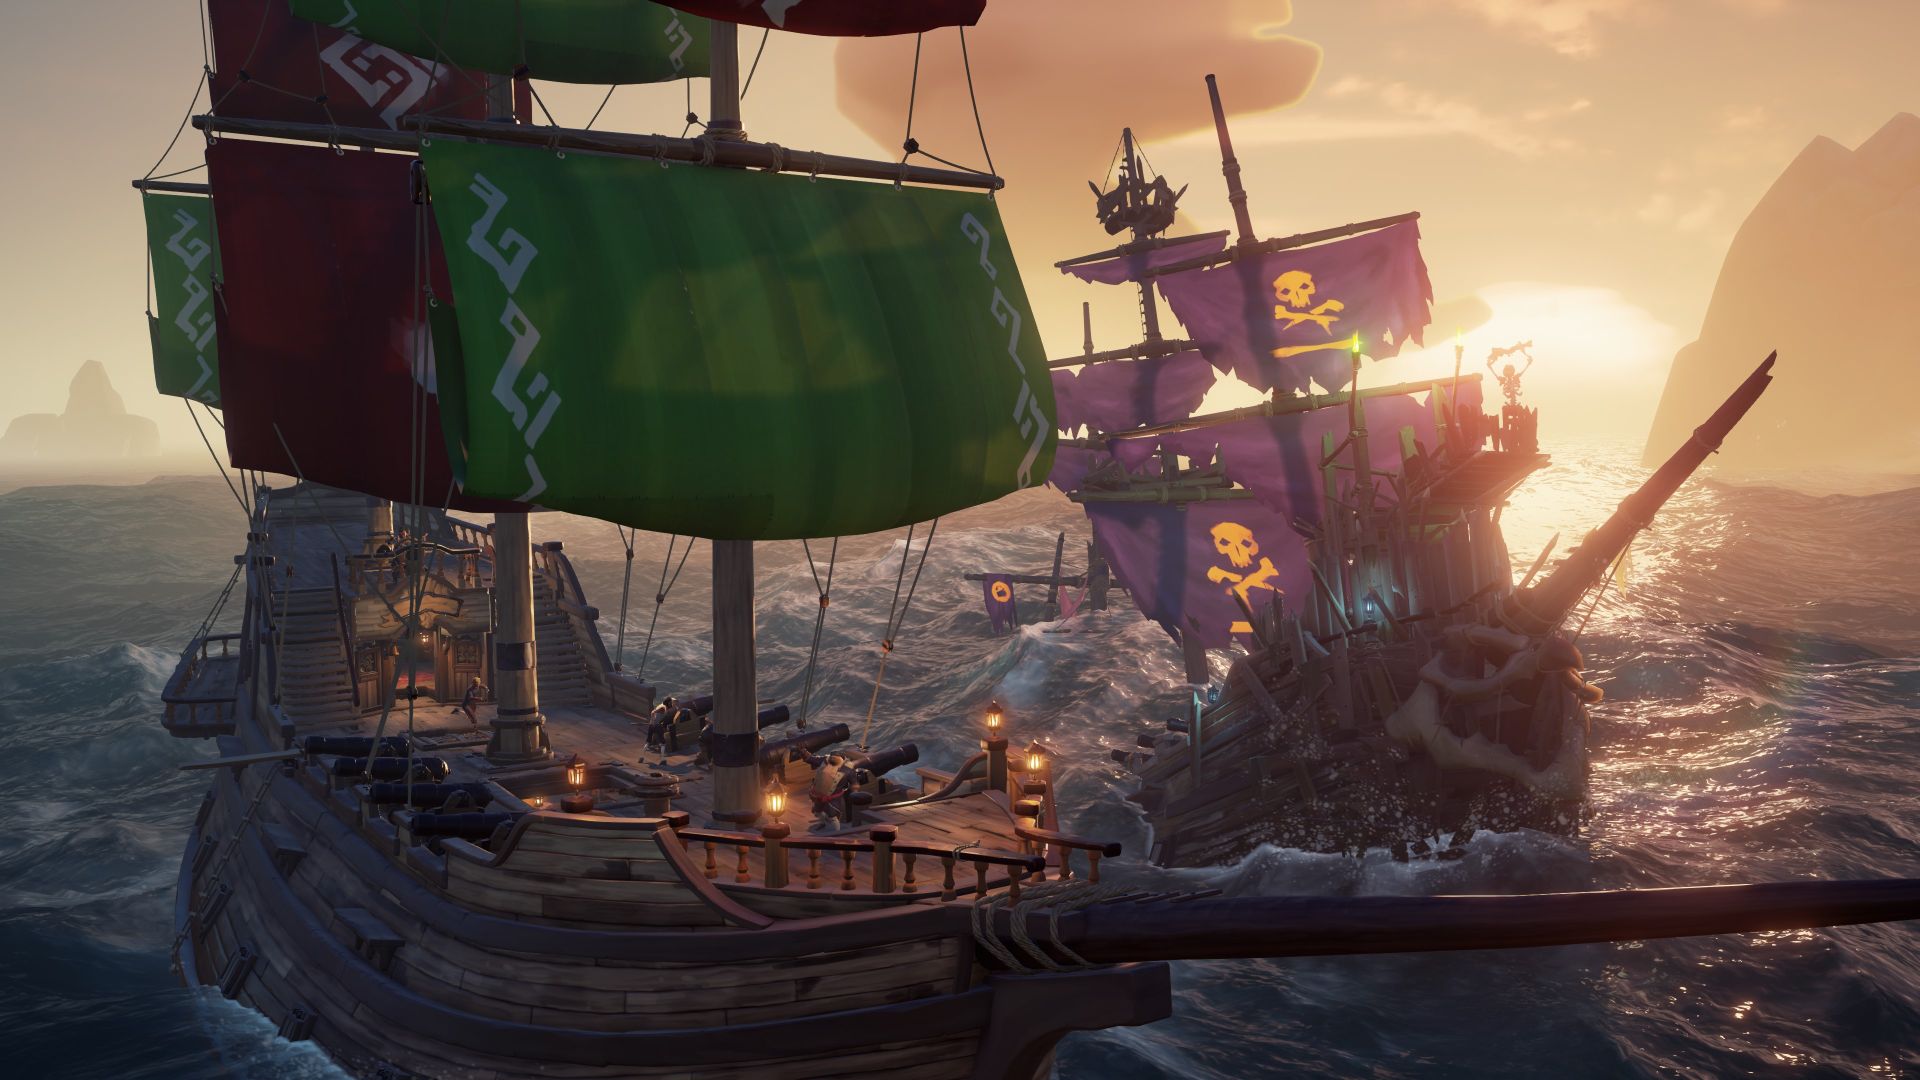 sea of thieves for playstation 4